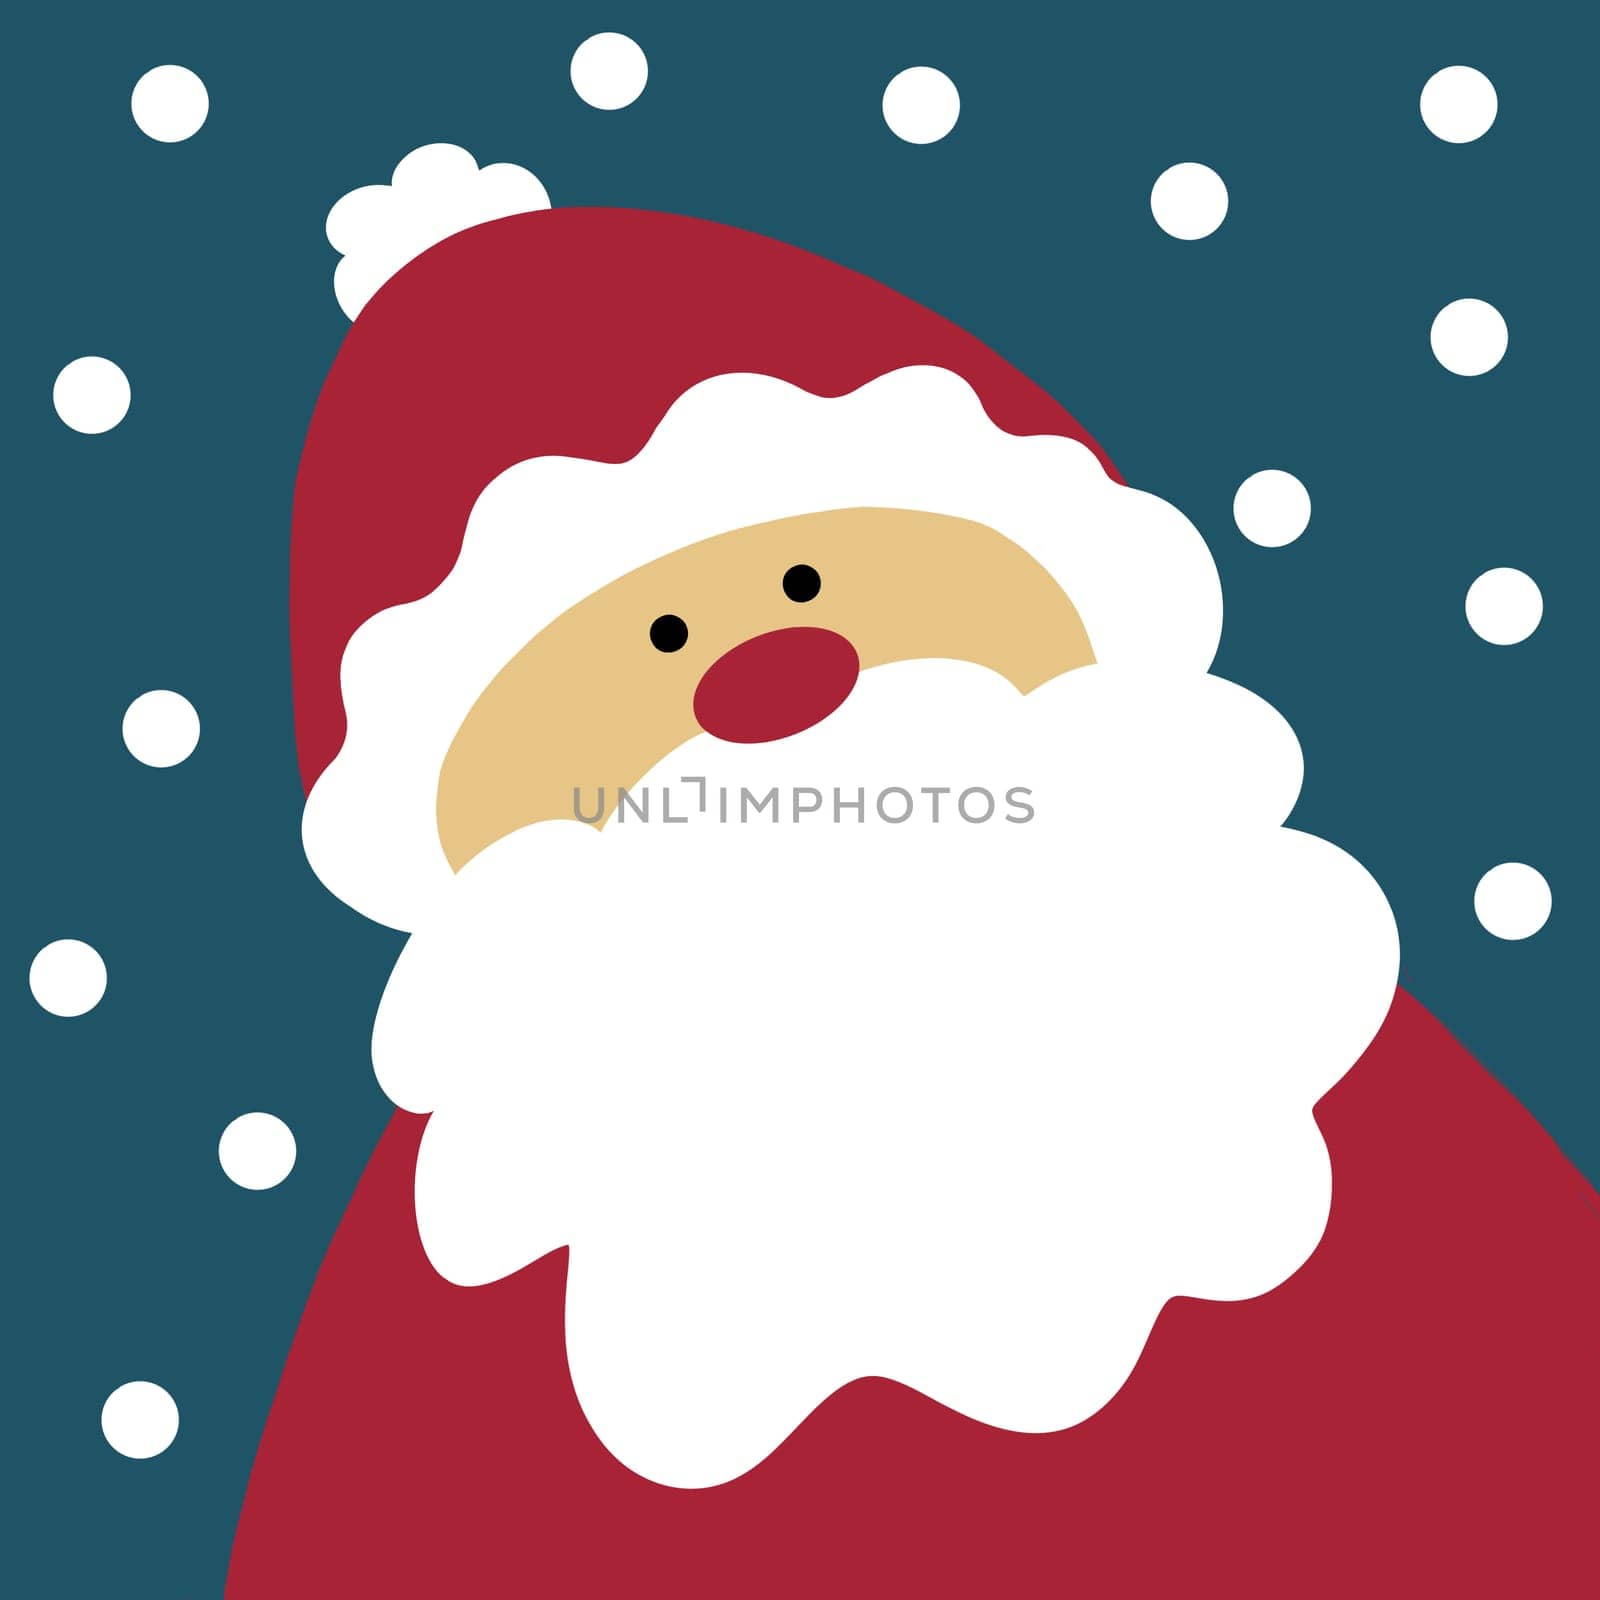 Illustration of a fun quirky Santa by RusticPuffin